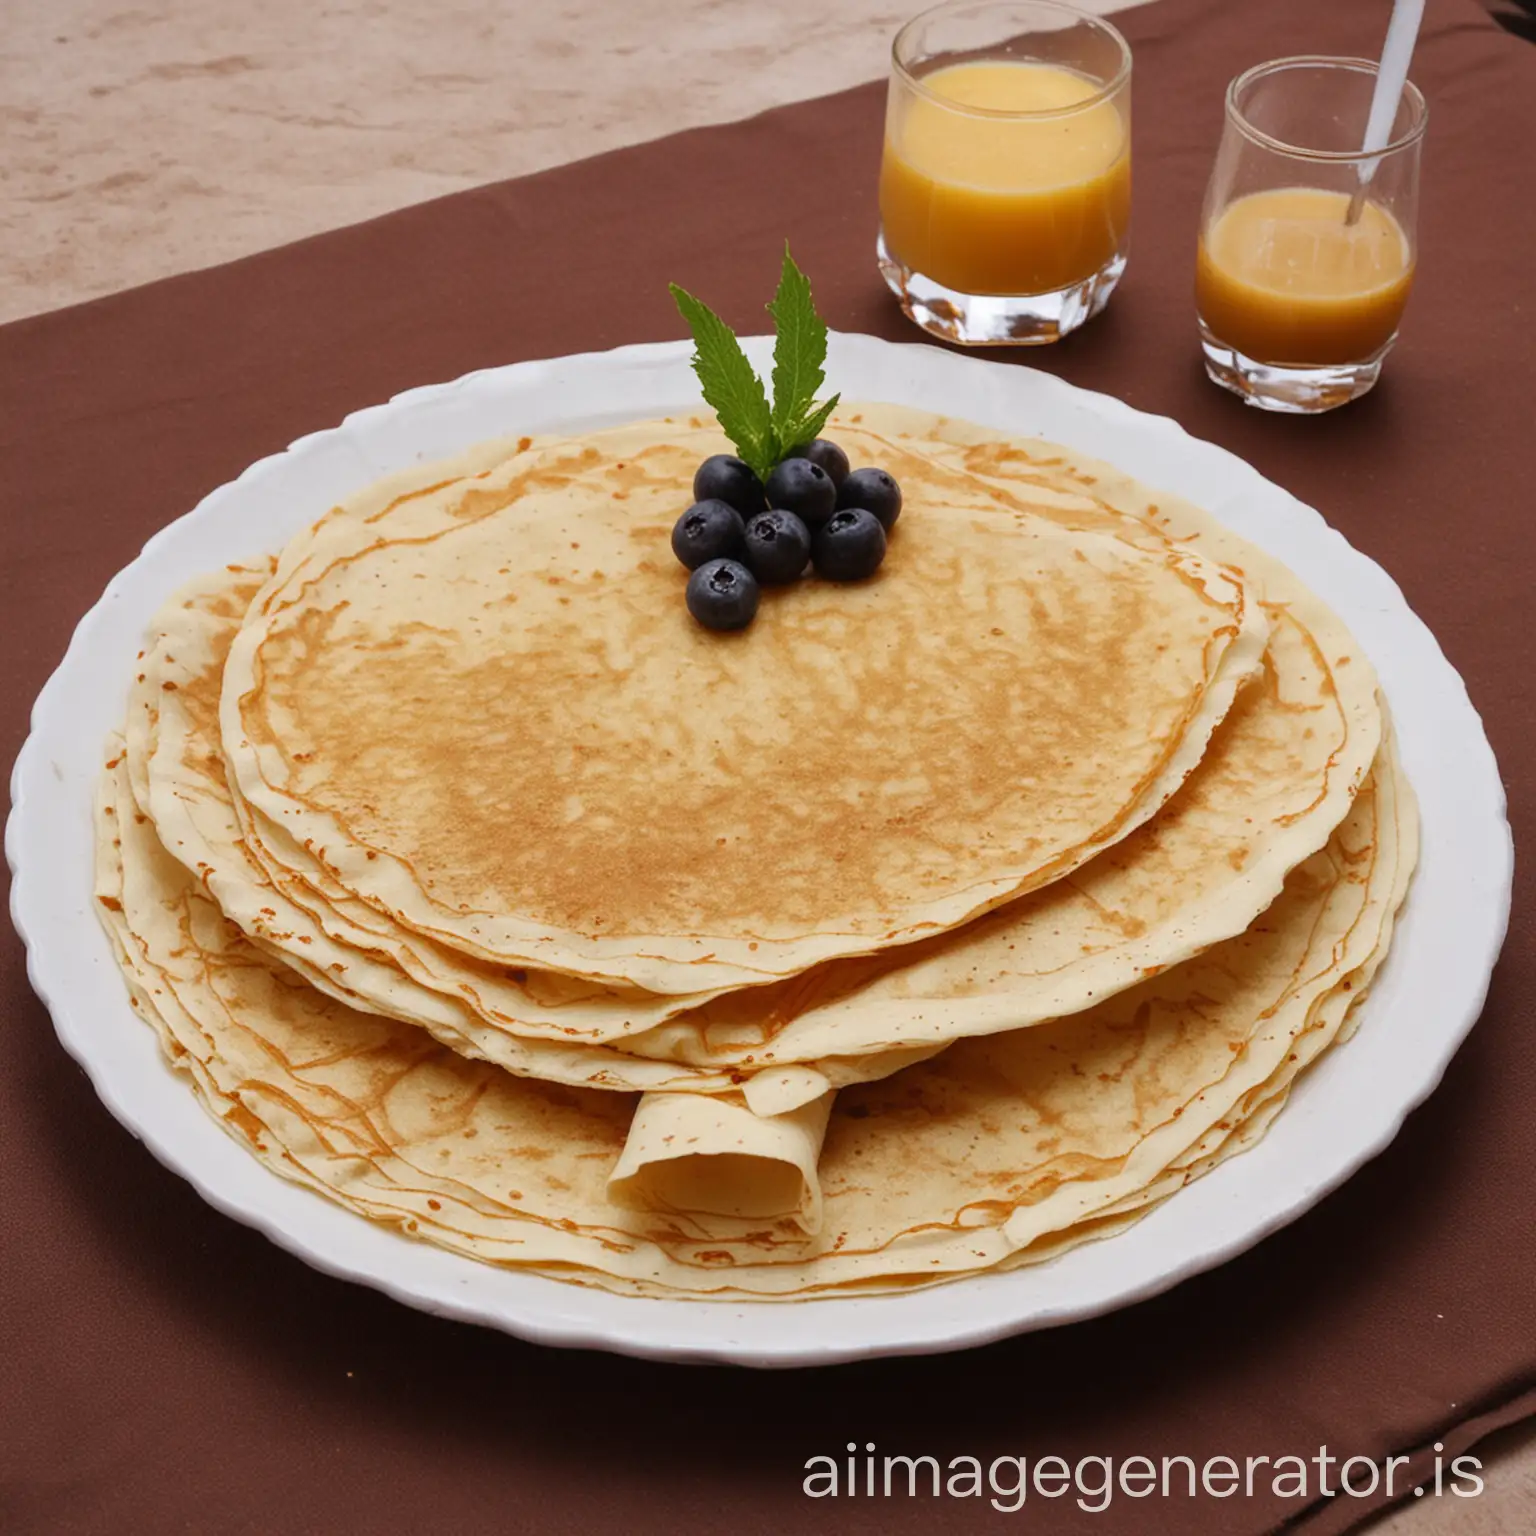 Delicious-Crepe-Catering-Service-in-Kinshasa